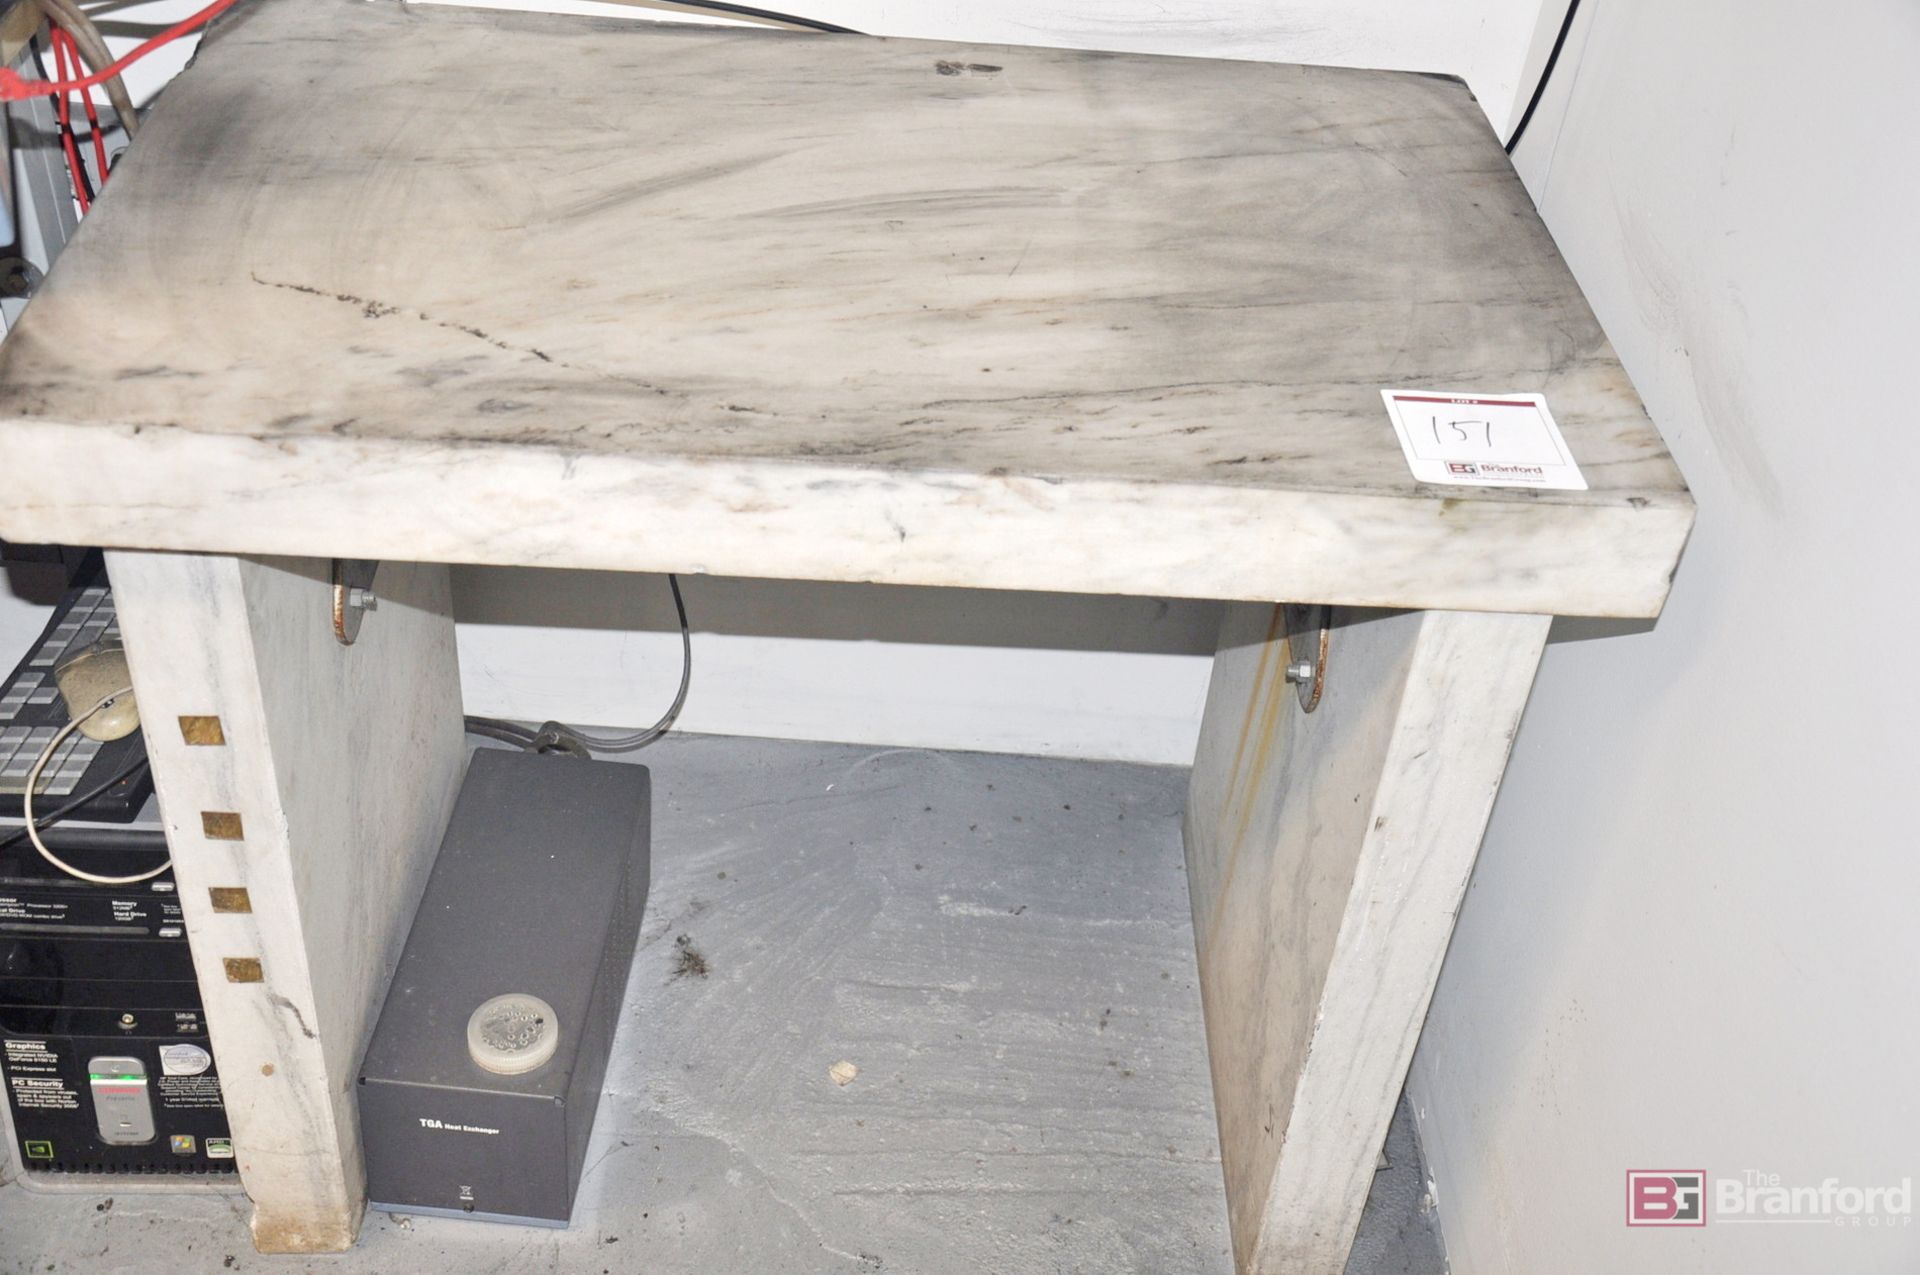 Precision marble tables for analytic instruments - Image 2 of 2